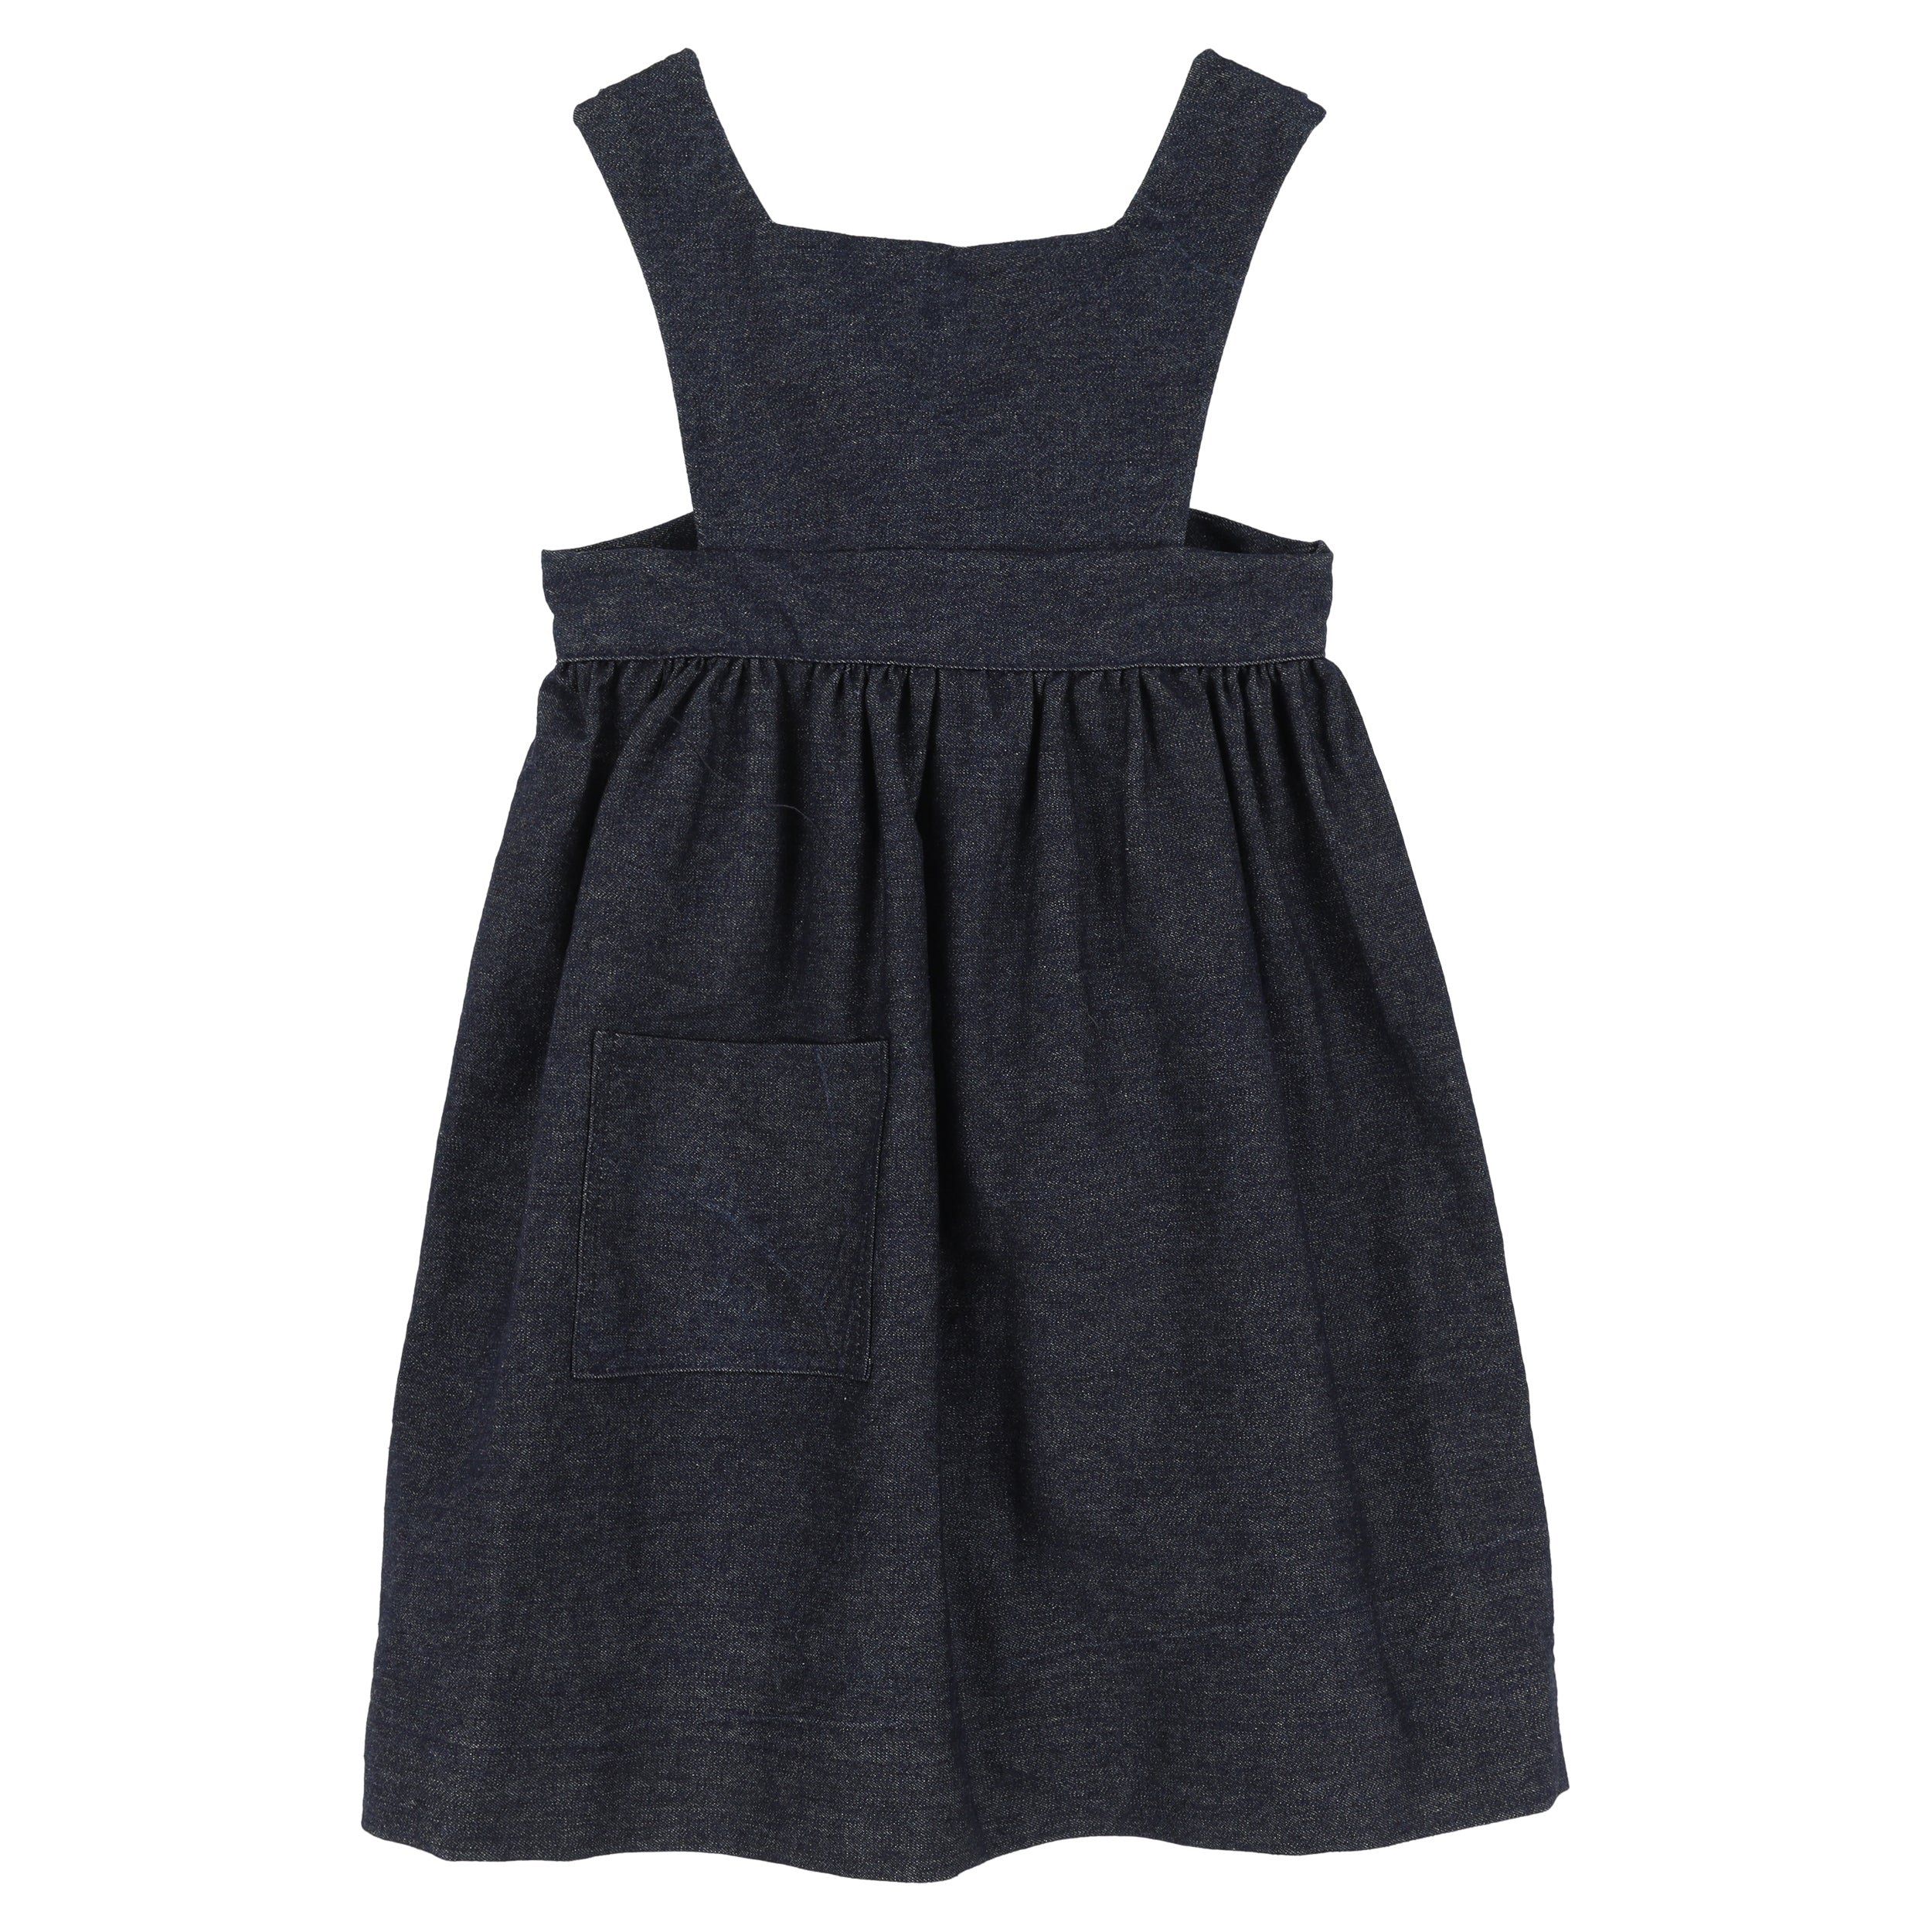 Carrier Company Child's Pinafore in Denim